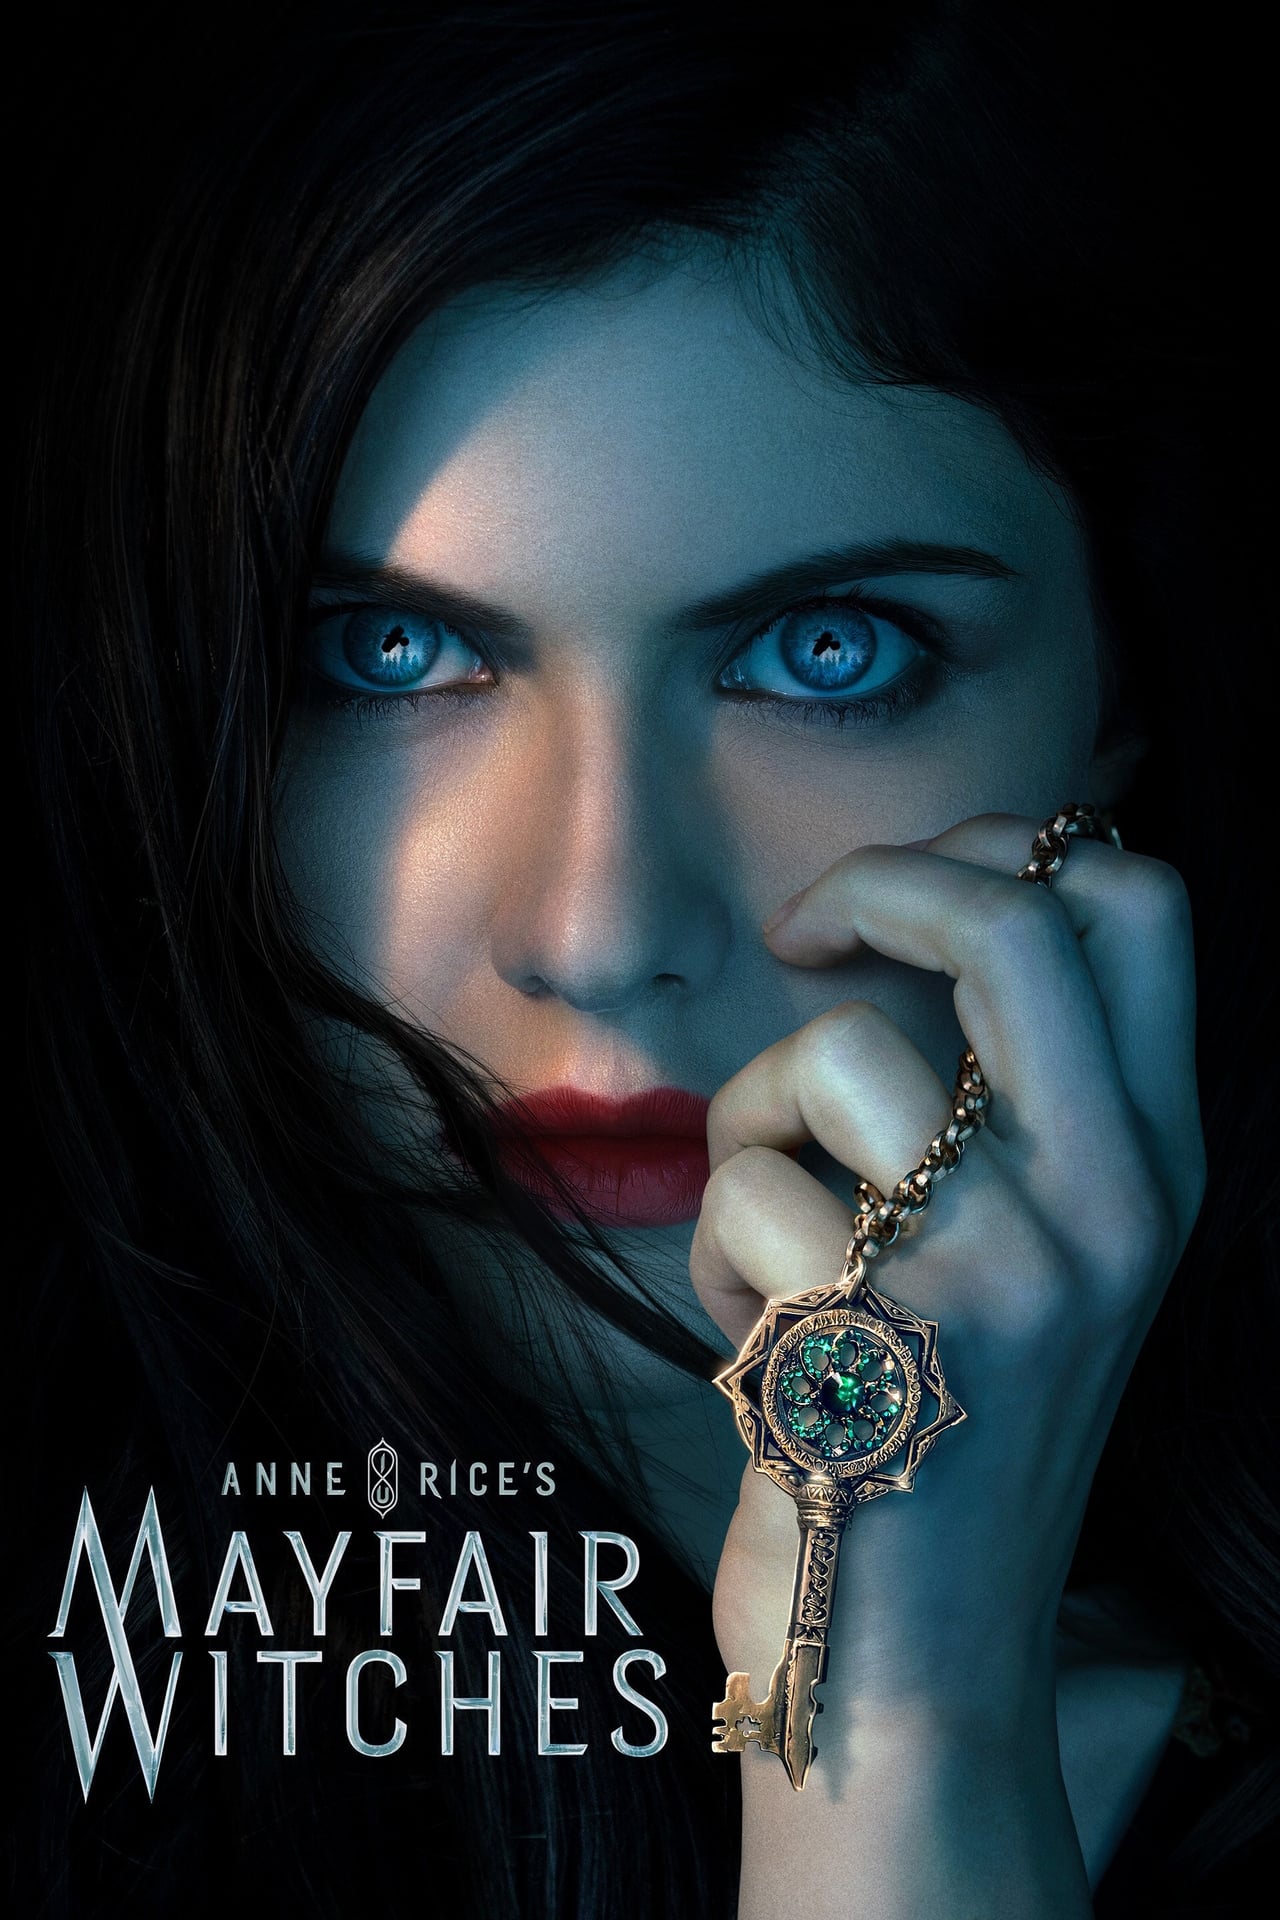 Assistir Anne Rice’s Mayfair Witches Online em HD